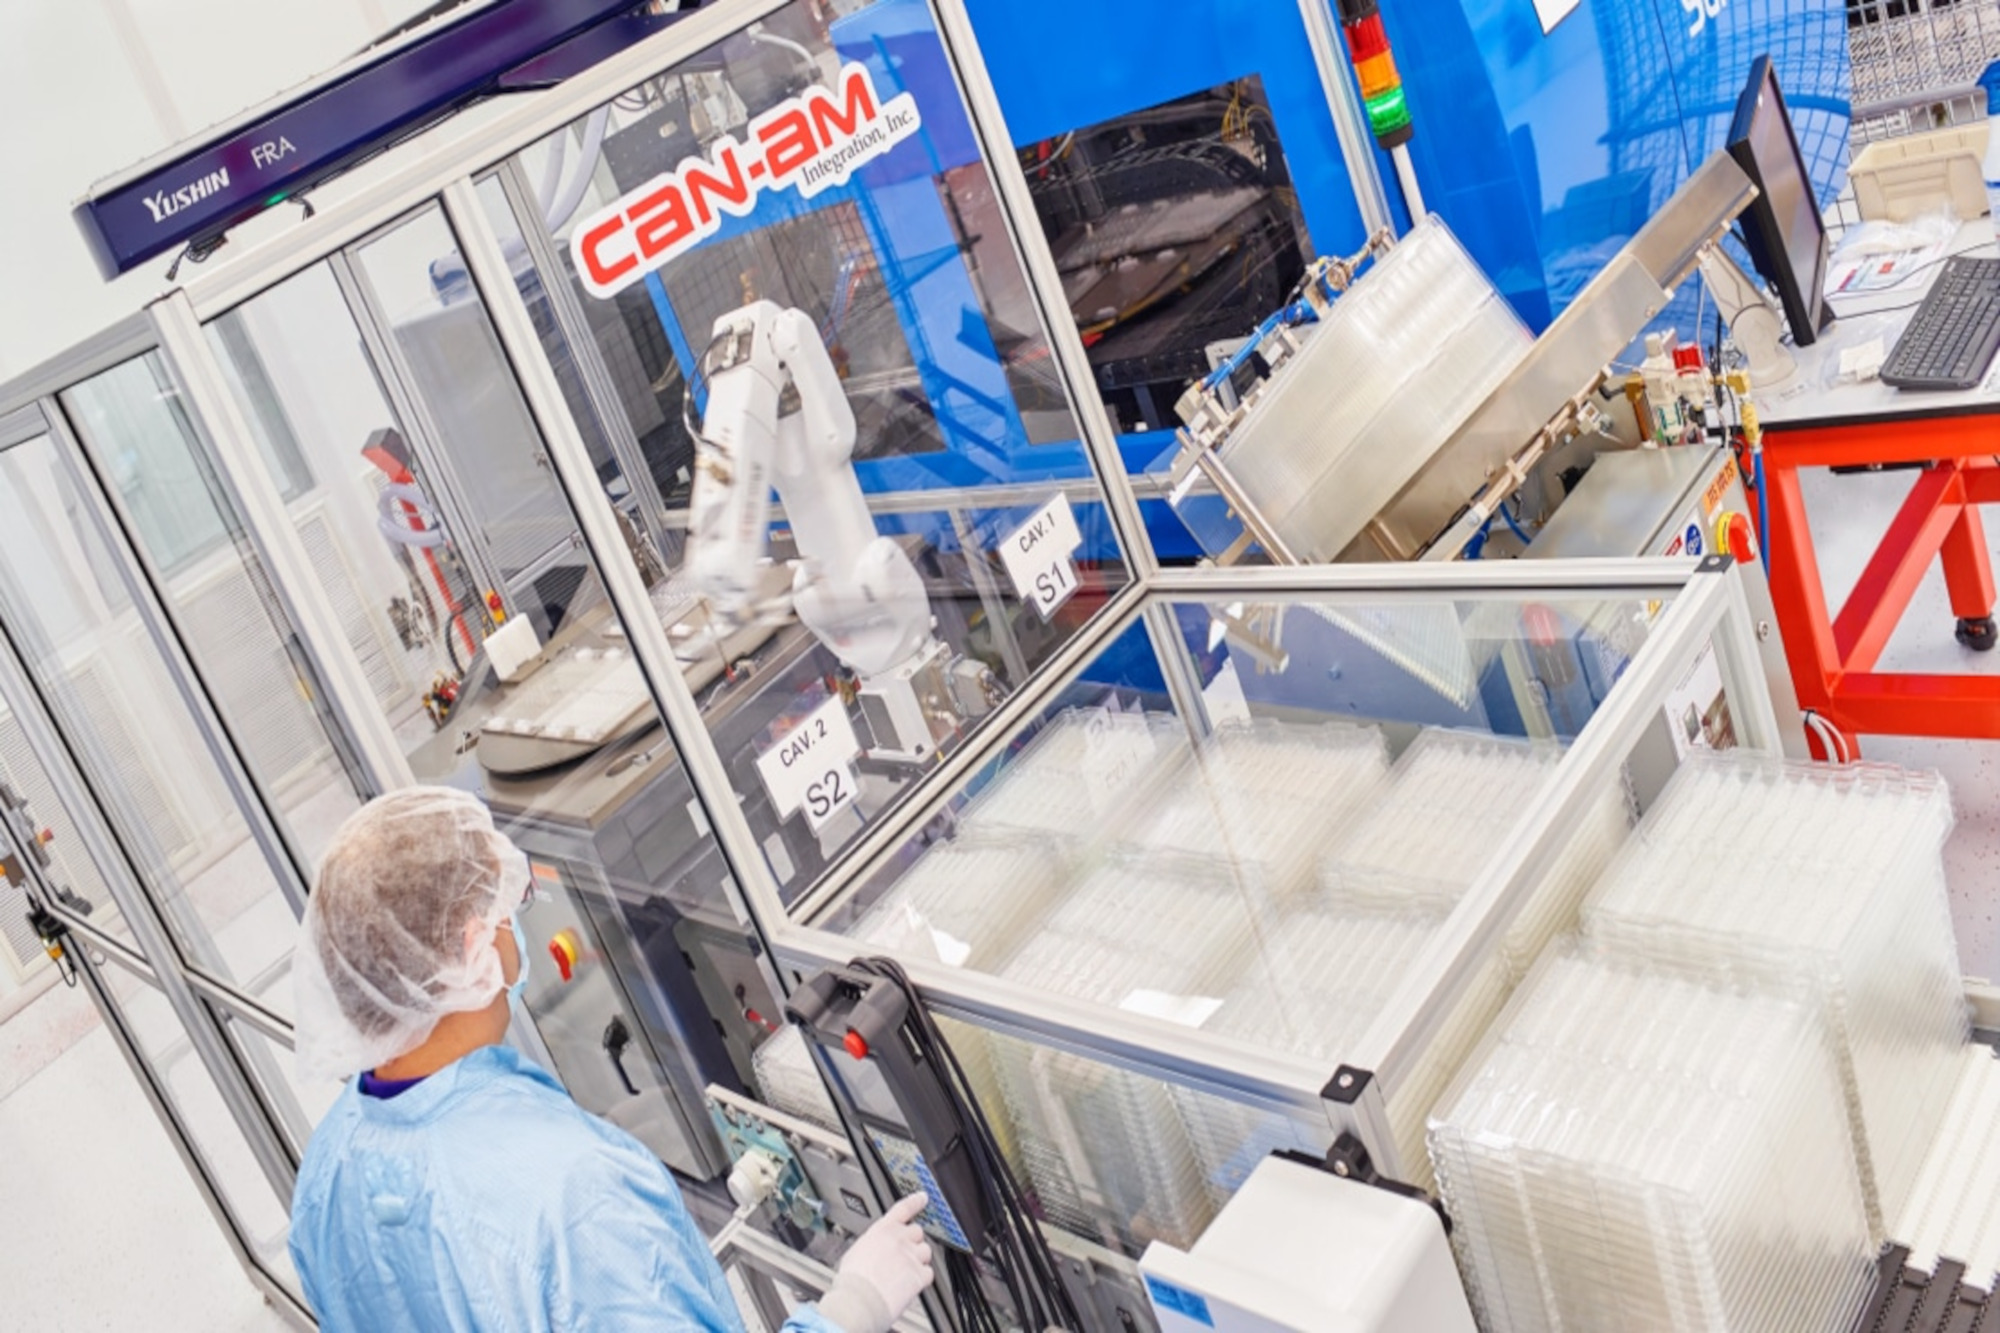 Cleanroom manufacturer manufacturing additional stock in preparation of a transfer tooling program